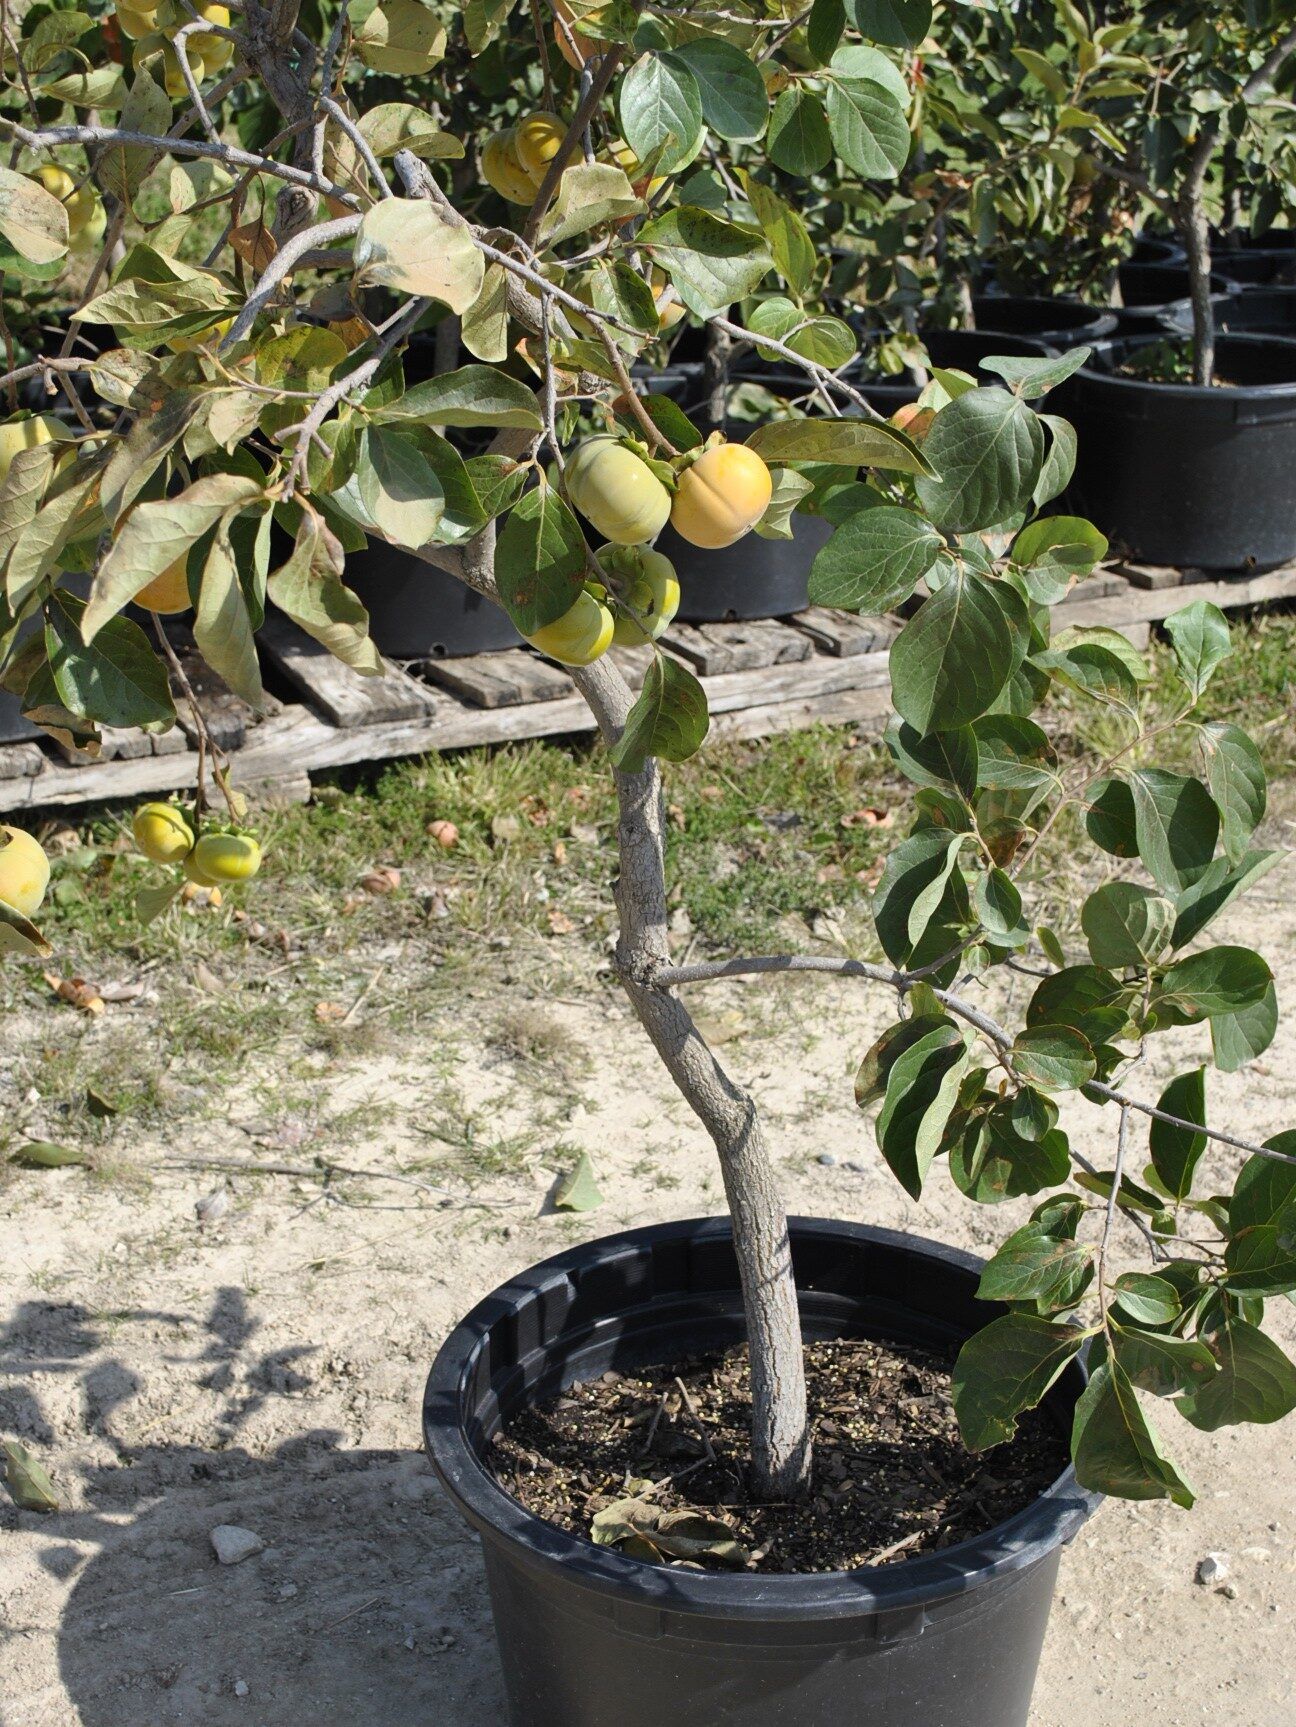 Growing Fruit Trees in Containers, Part 2 - Stark Bro's